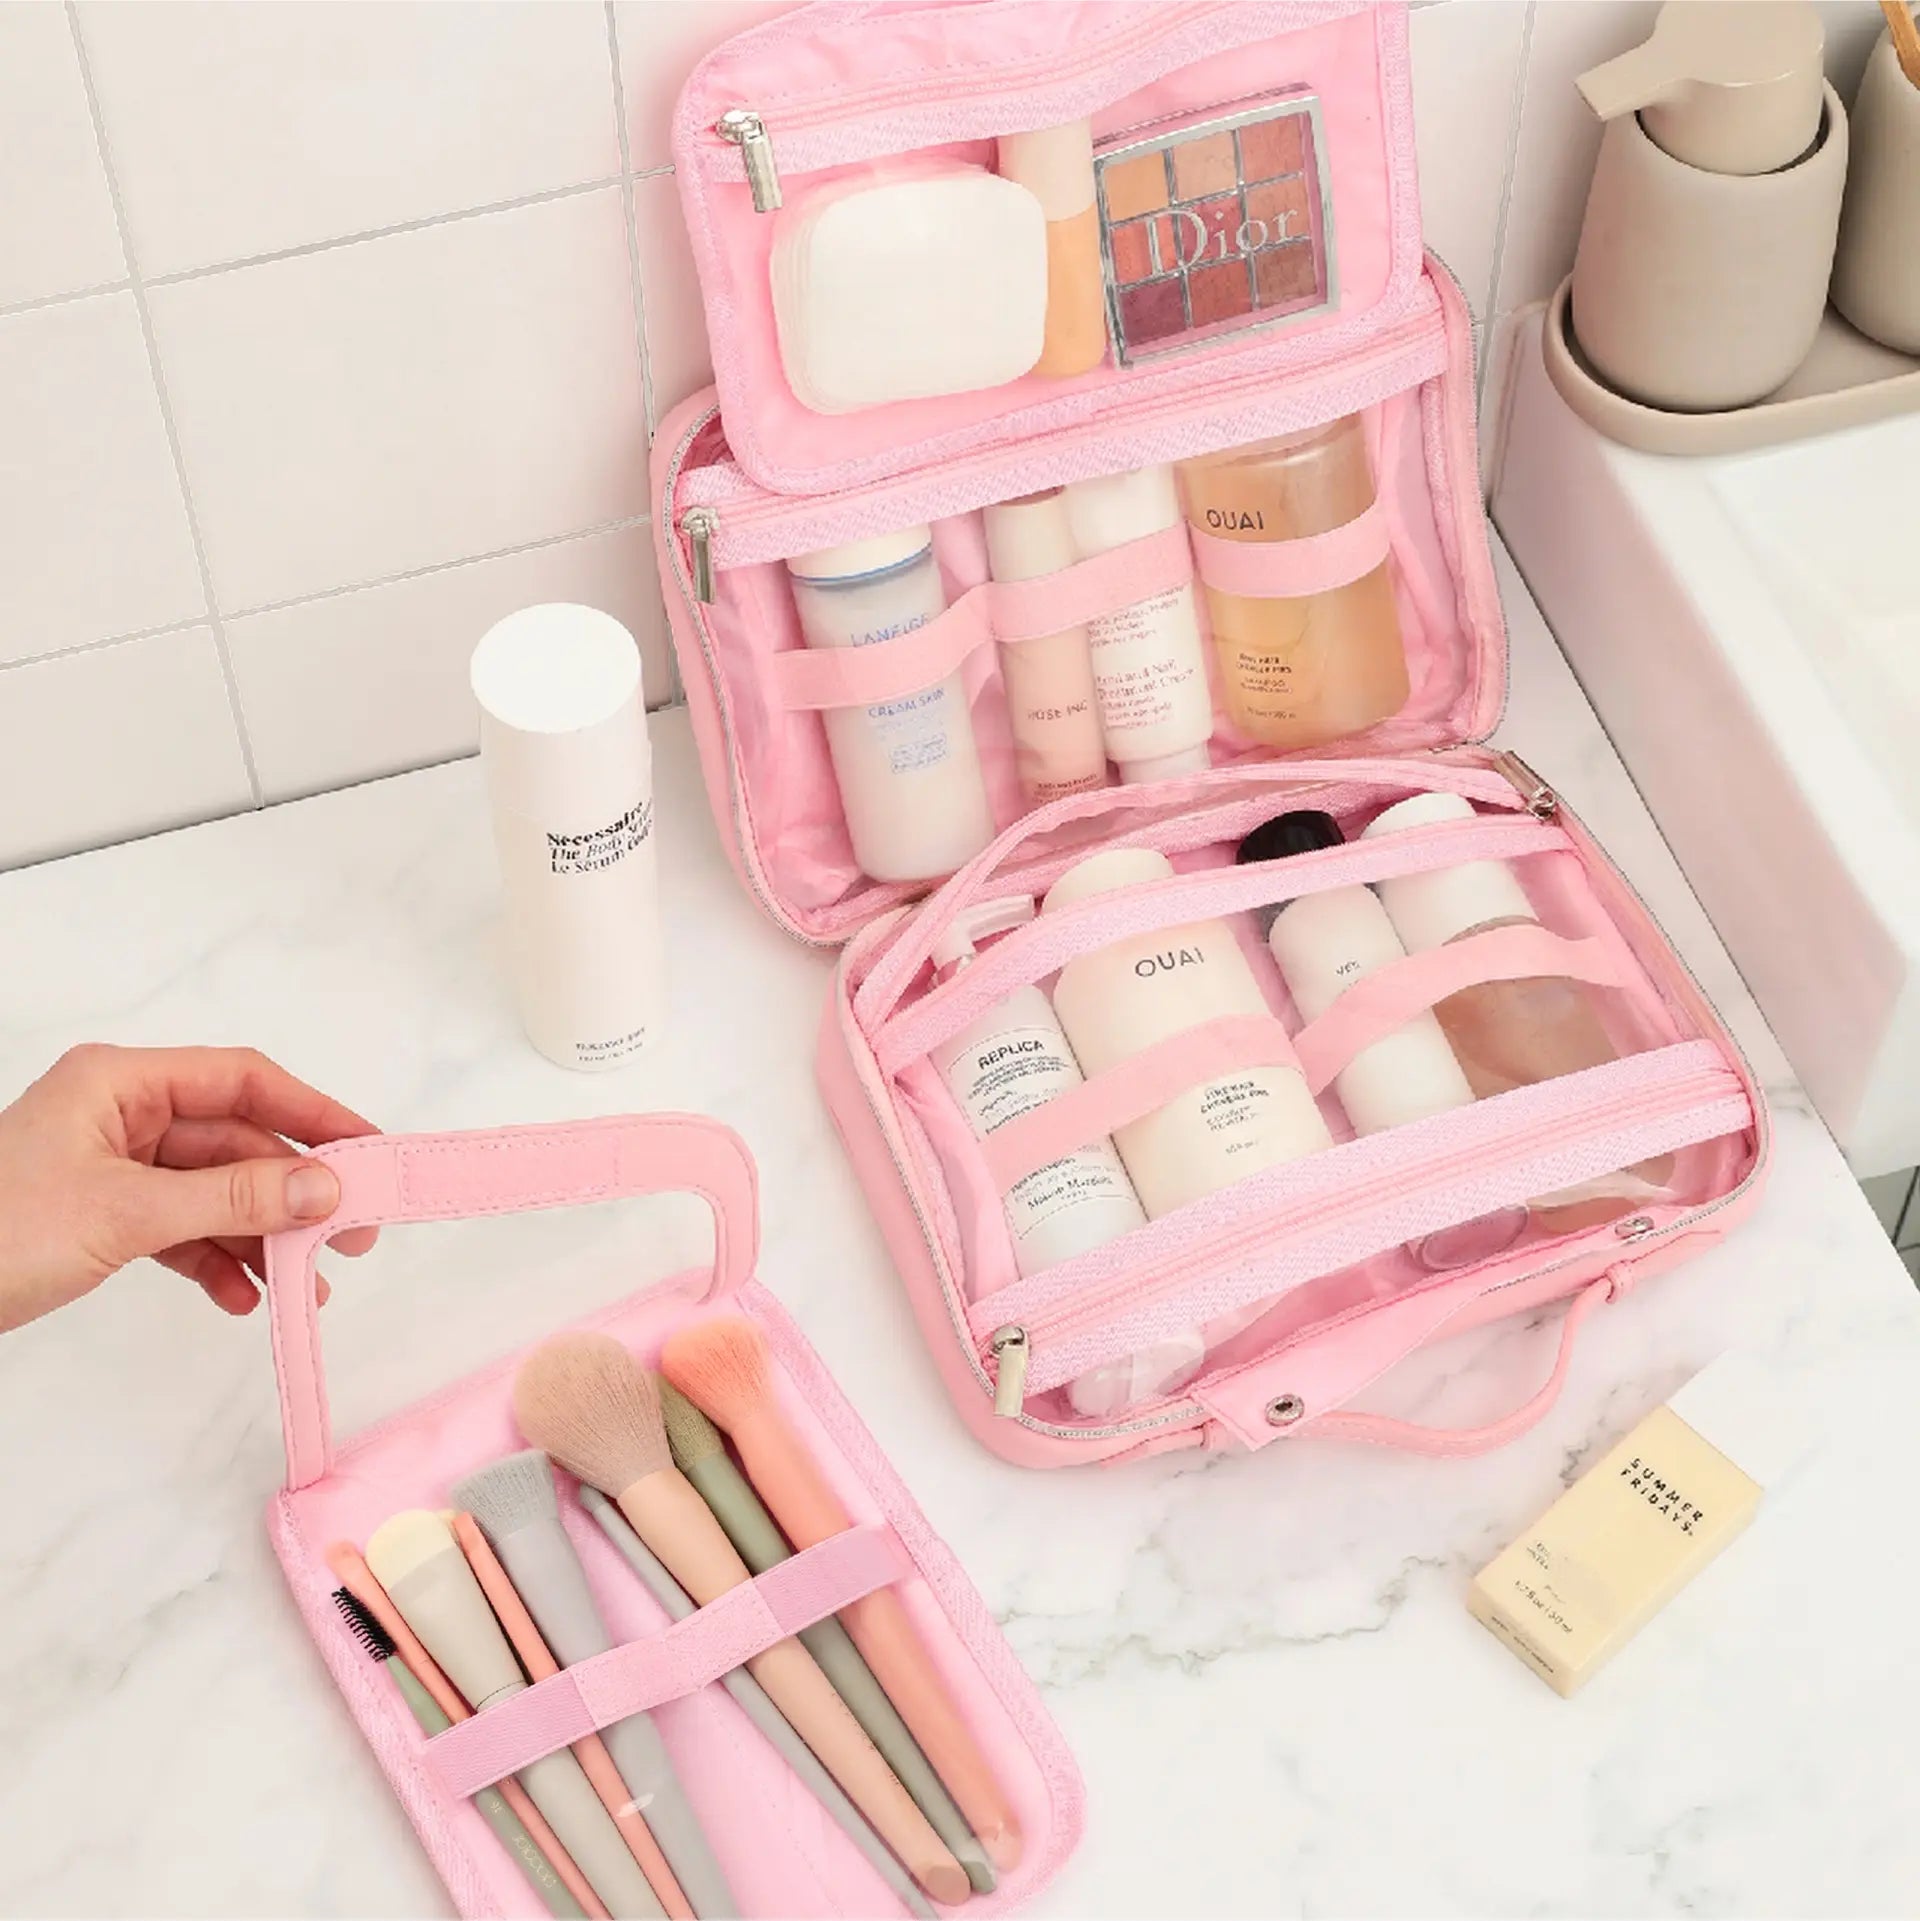 Ultimate Toiletry Bags for Travel and Home - Stylish and